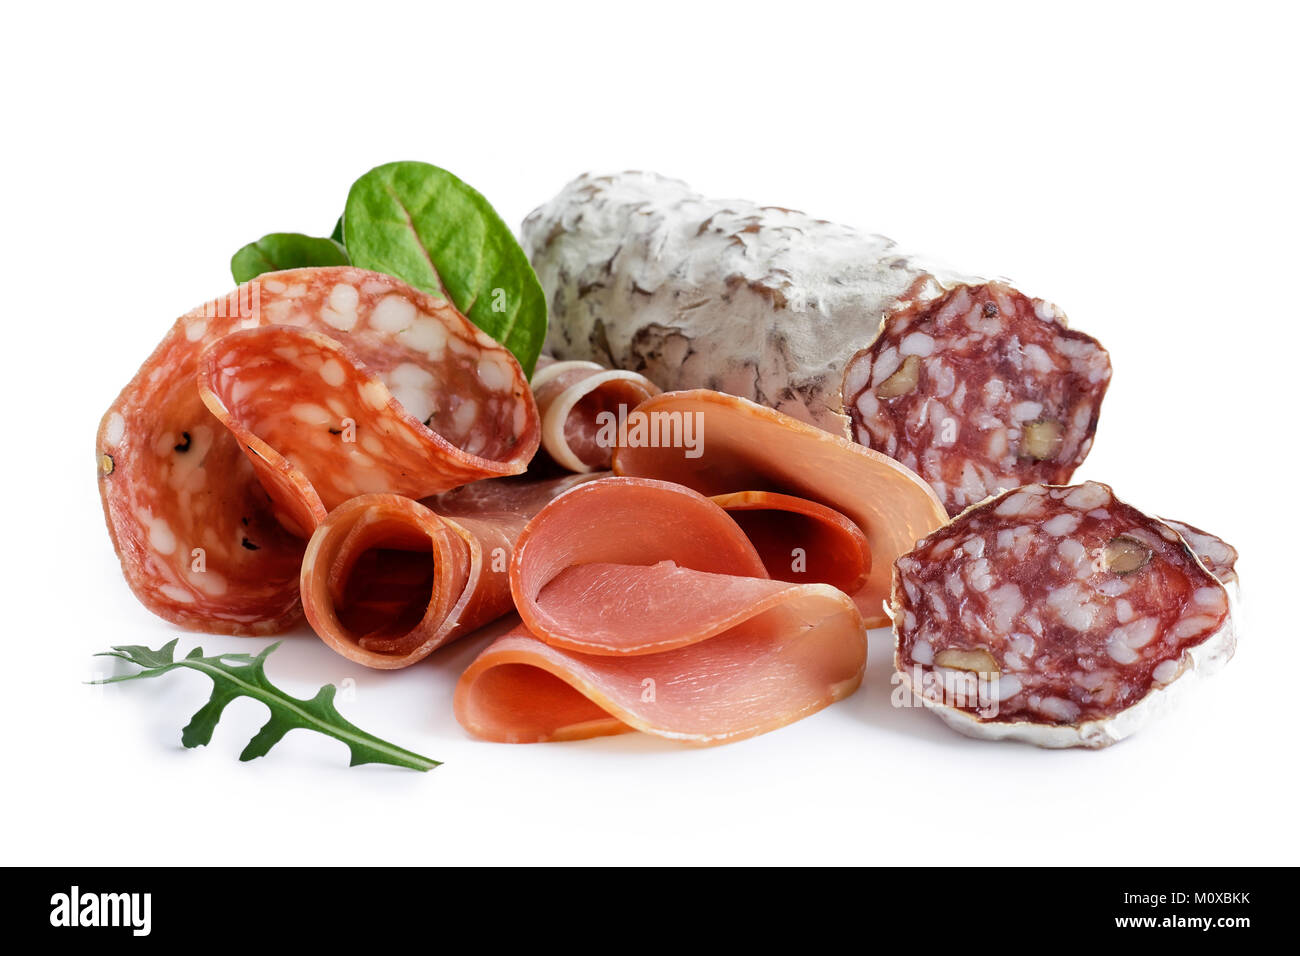 Mixed air cured sliced meats isolated on white. Green leaves. Stock Photo